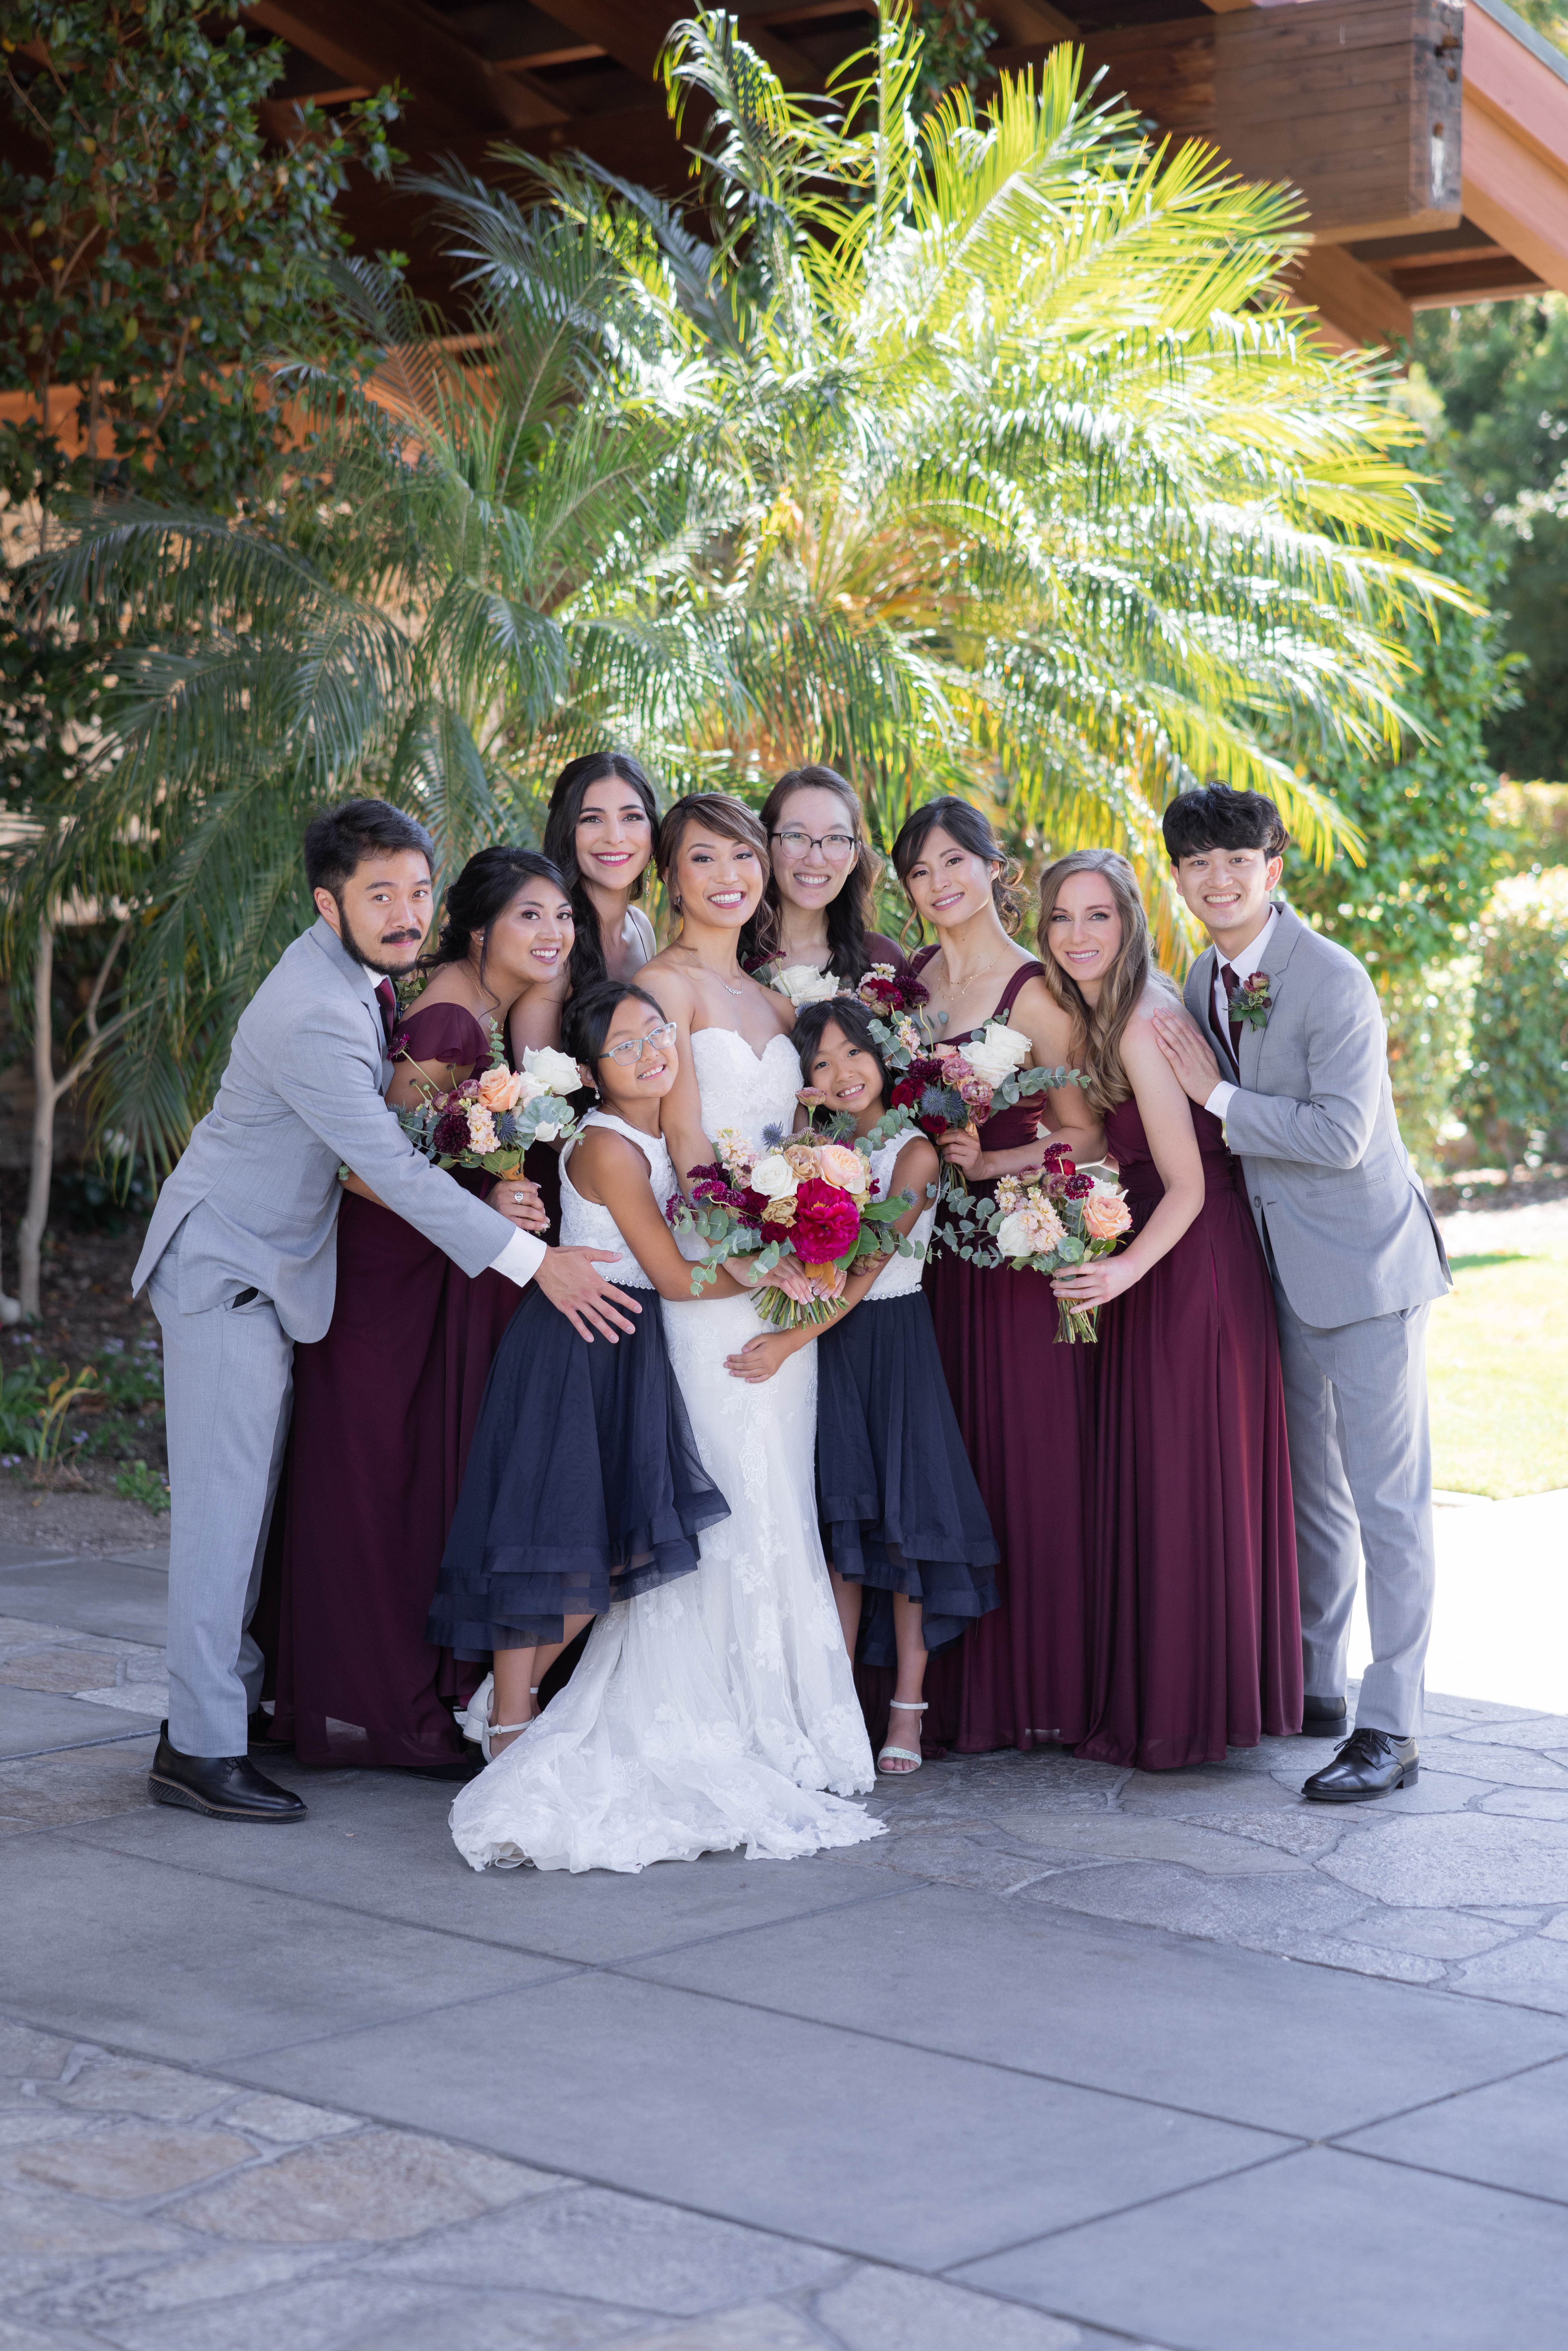 bride in strapless wedding dress and jewel toned bridal bouquet  stand with co-ed wedding party in maroon